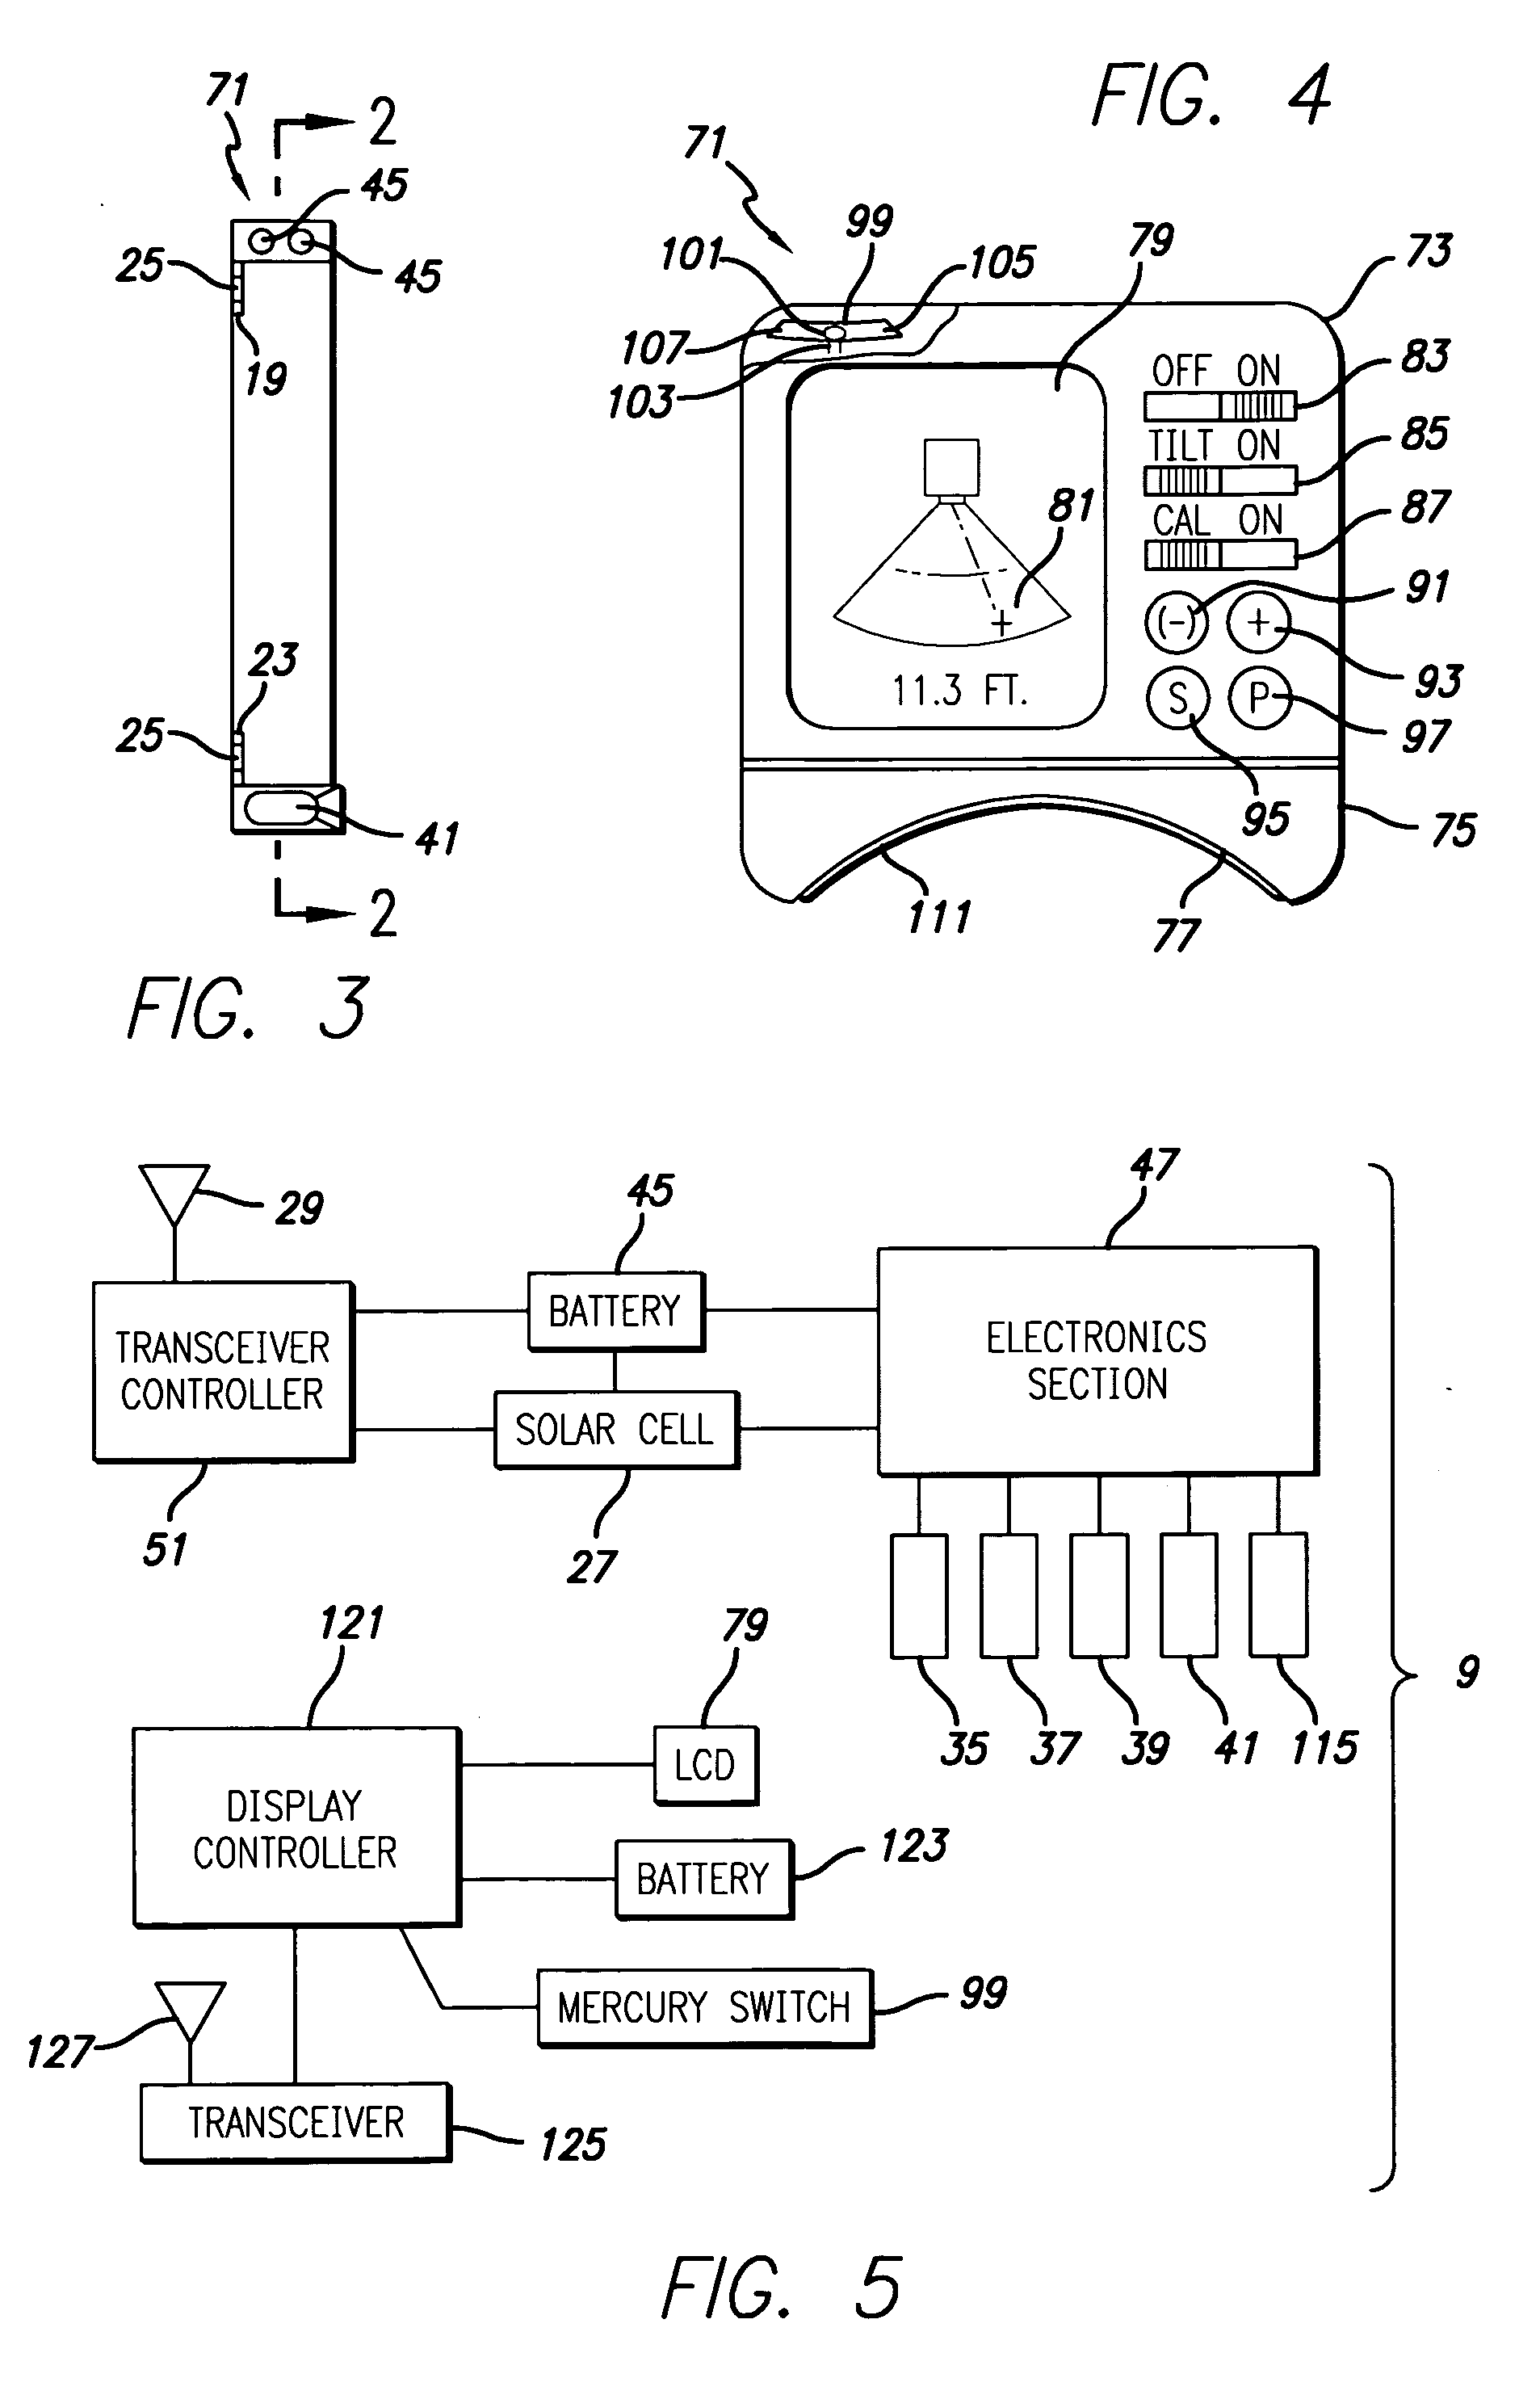 Vehicle reverse warning and distance measurement system